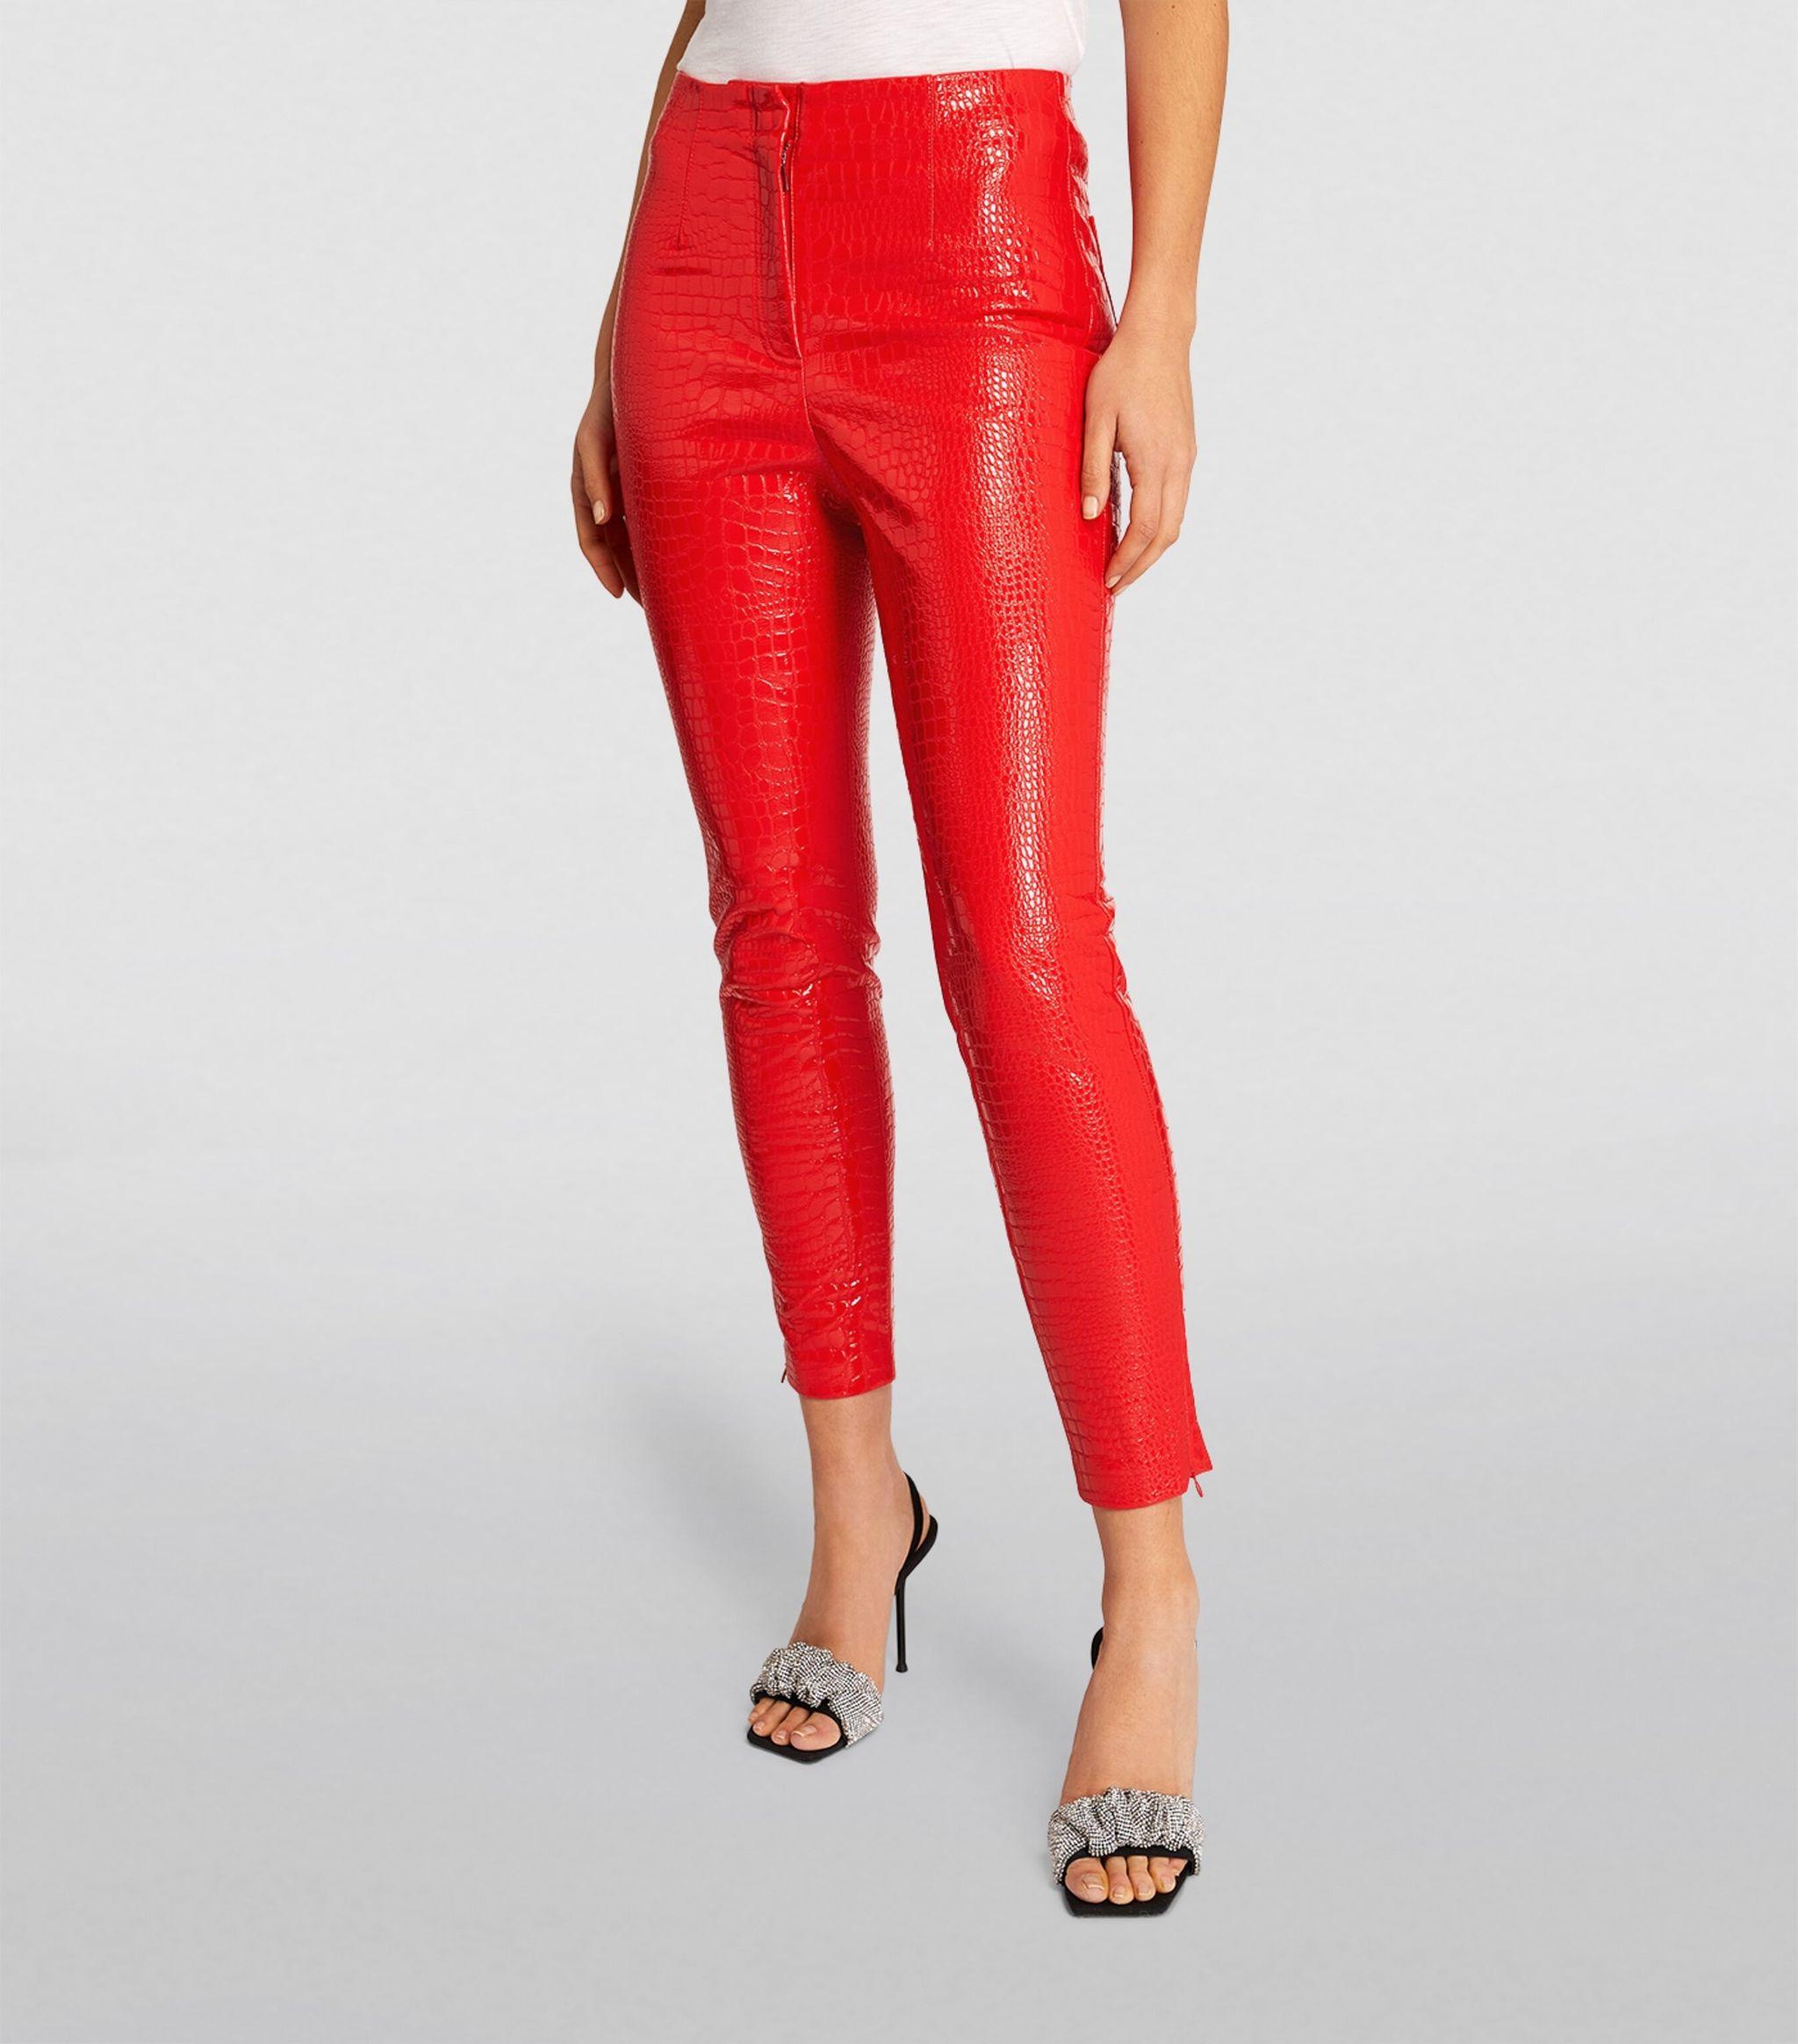 ROTATE BIRGER CHRISTENSEN Croc-embossed Faux Leather Leggings in Red | Lyst